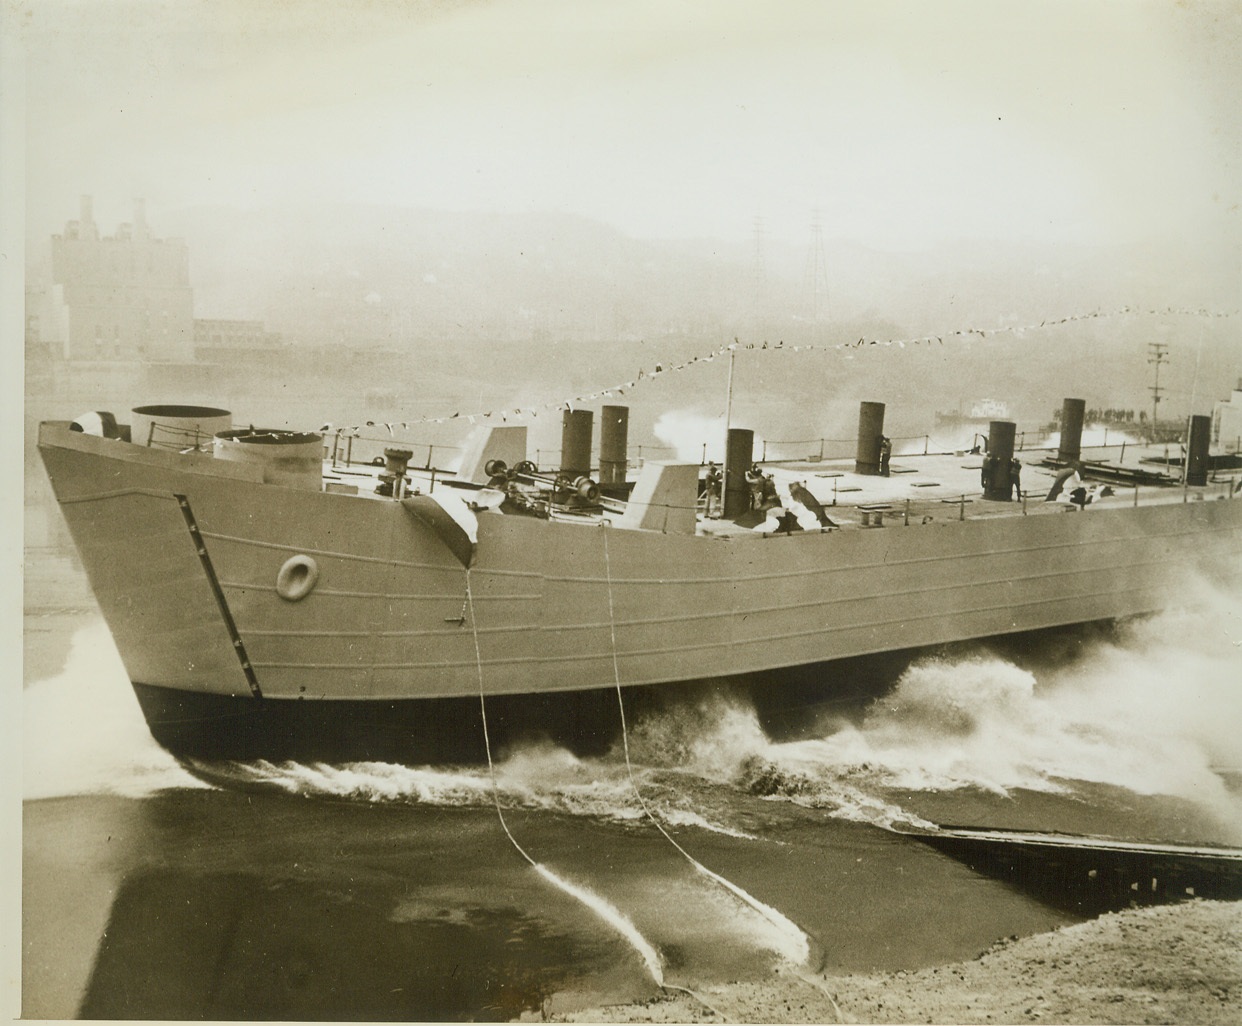 New Type Offensive Craft Launched Inland, 2/1/1943. AMBRIDGE, PA. – A new type tank landing ship splashes into the Ohio river after skidding down the ways of the Navy shipyard built and operated by the American Bridge Company. The U.S. steel subsidiary launched the new style vessel today, exactly nine months from the date workmen began converting 64 swampy acres into an inland shipbuilding plant. The conversion work involved changing the course of a creek, constructing a highway and bridges and erecting 23 buildings. Credit: (ACME);